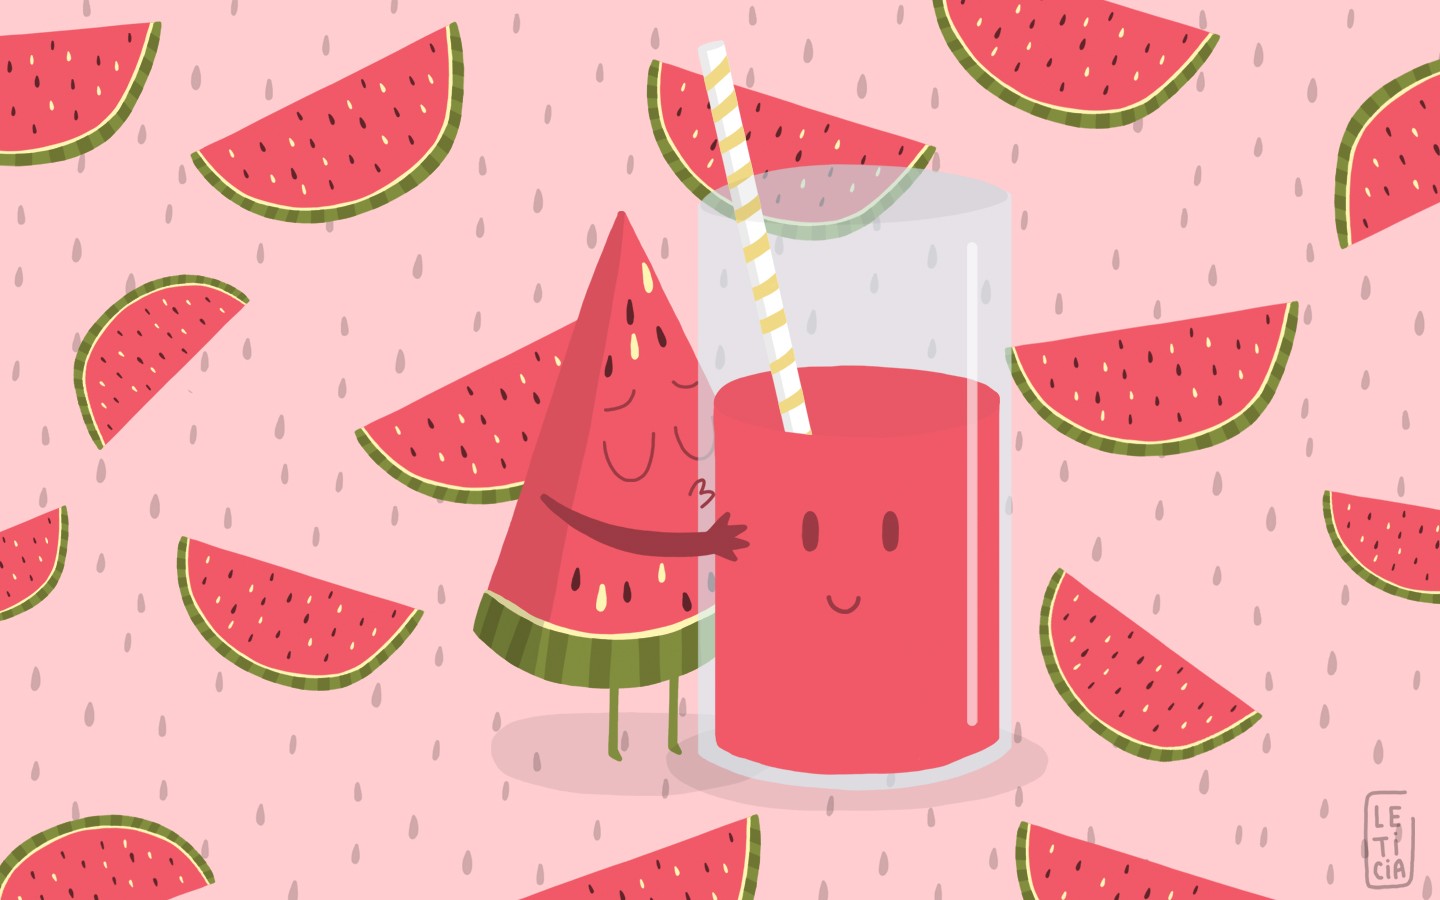 General 1440x900 watermelons comic art drawing red fruit drinking glass juice red background food digital art watermarked drinking straw seeds drink